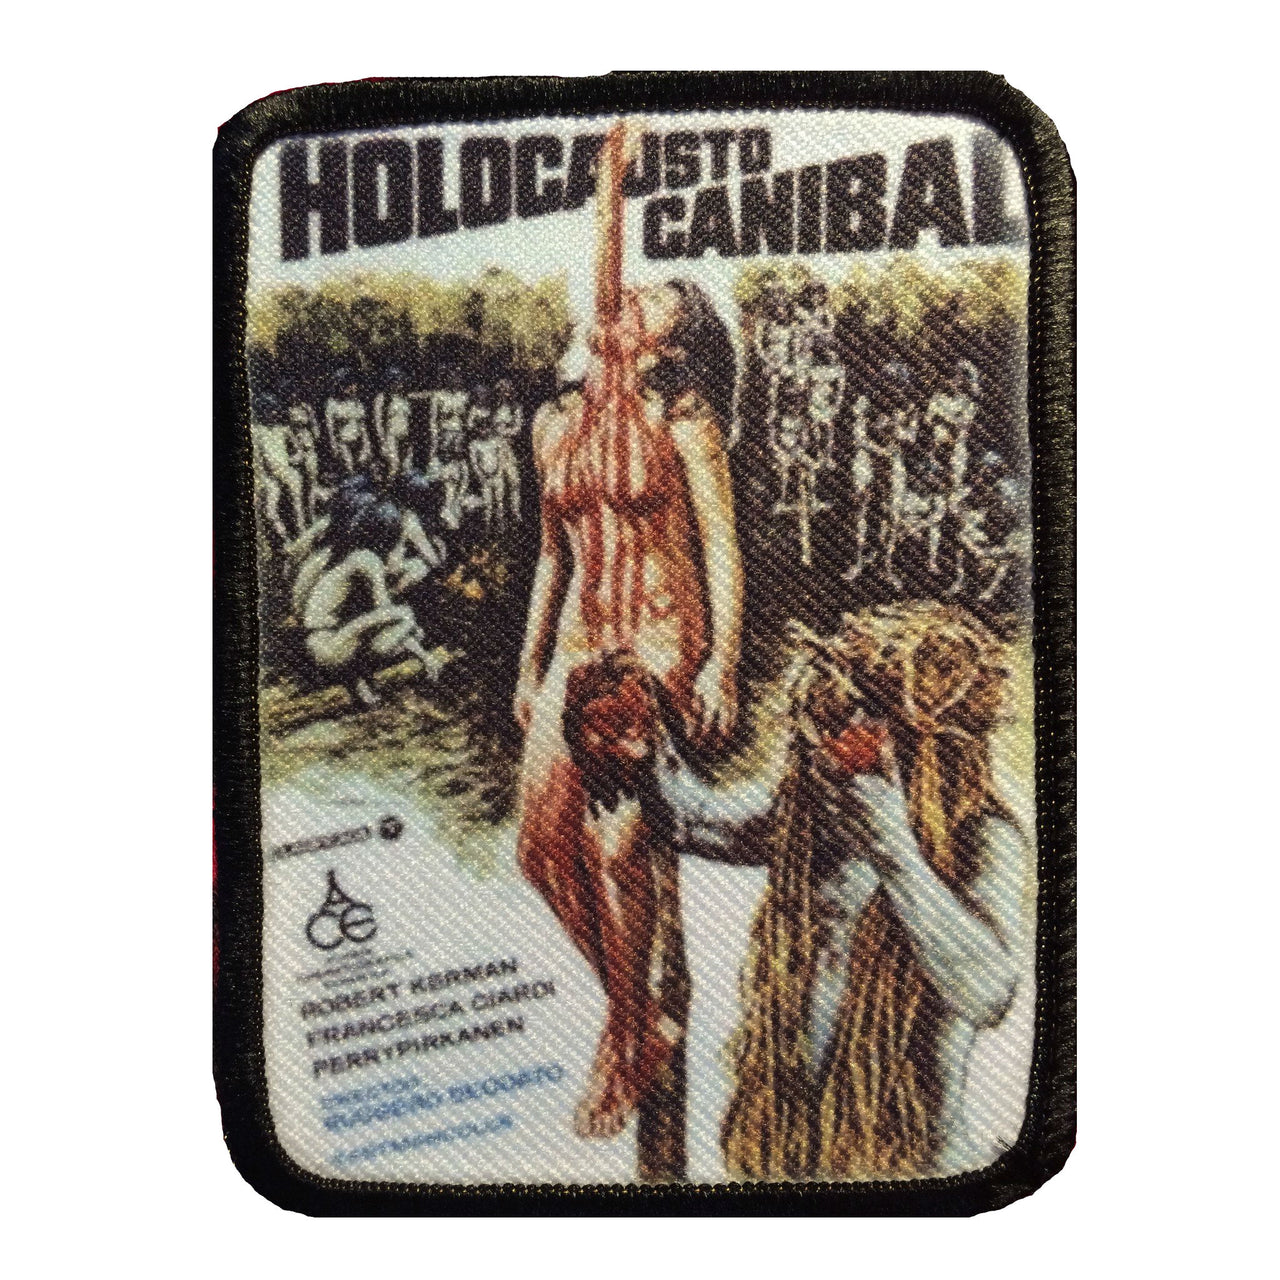 Cannibal Holocaust Embroidered Patch